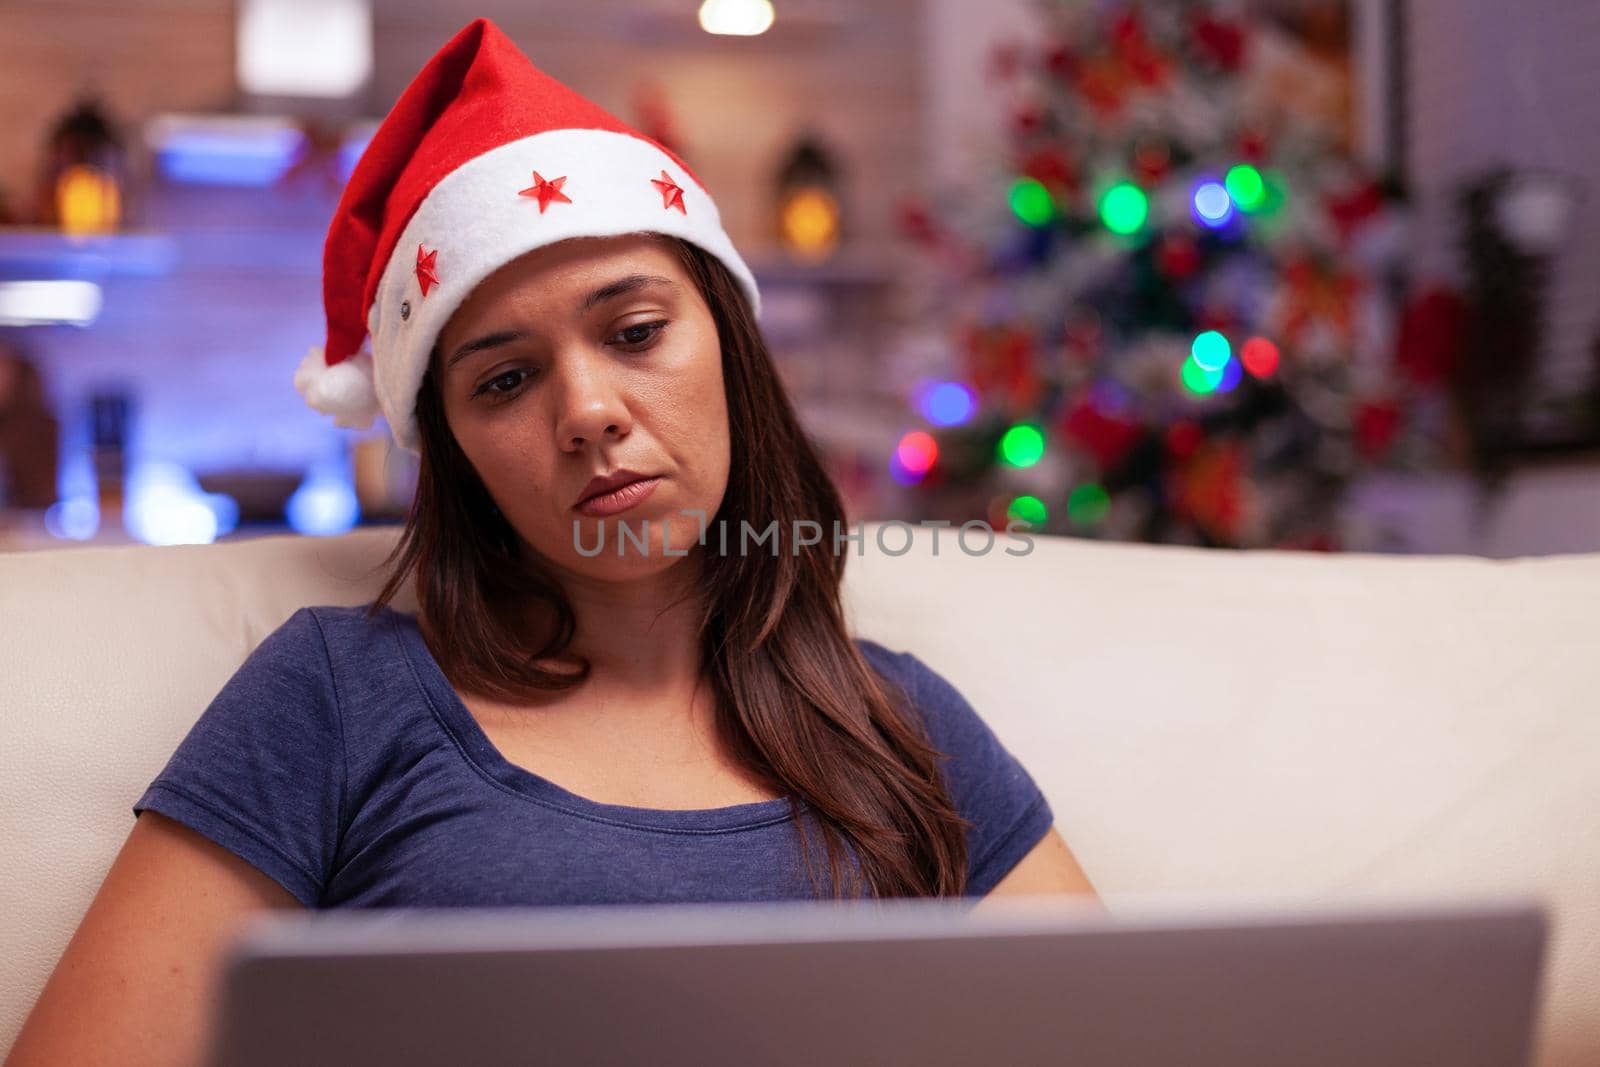 Business woman reading company email on laptop computer during christmastime by DCStudio